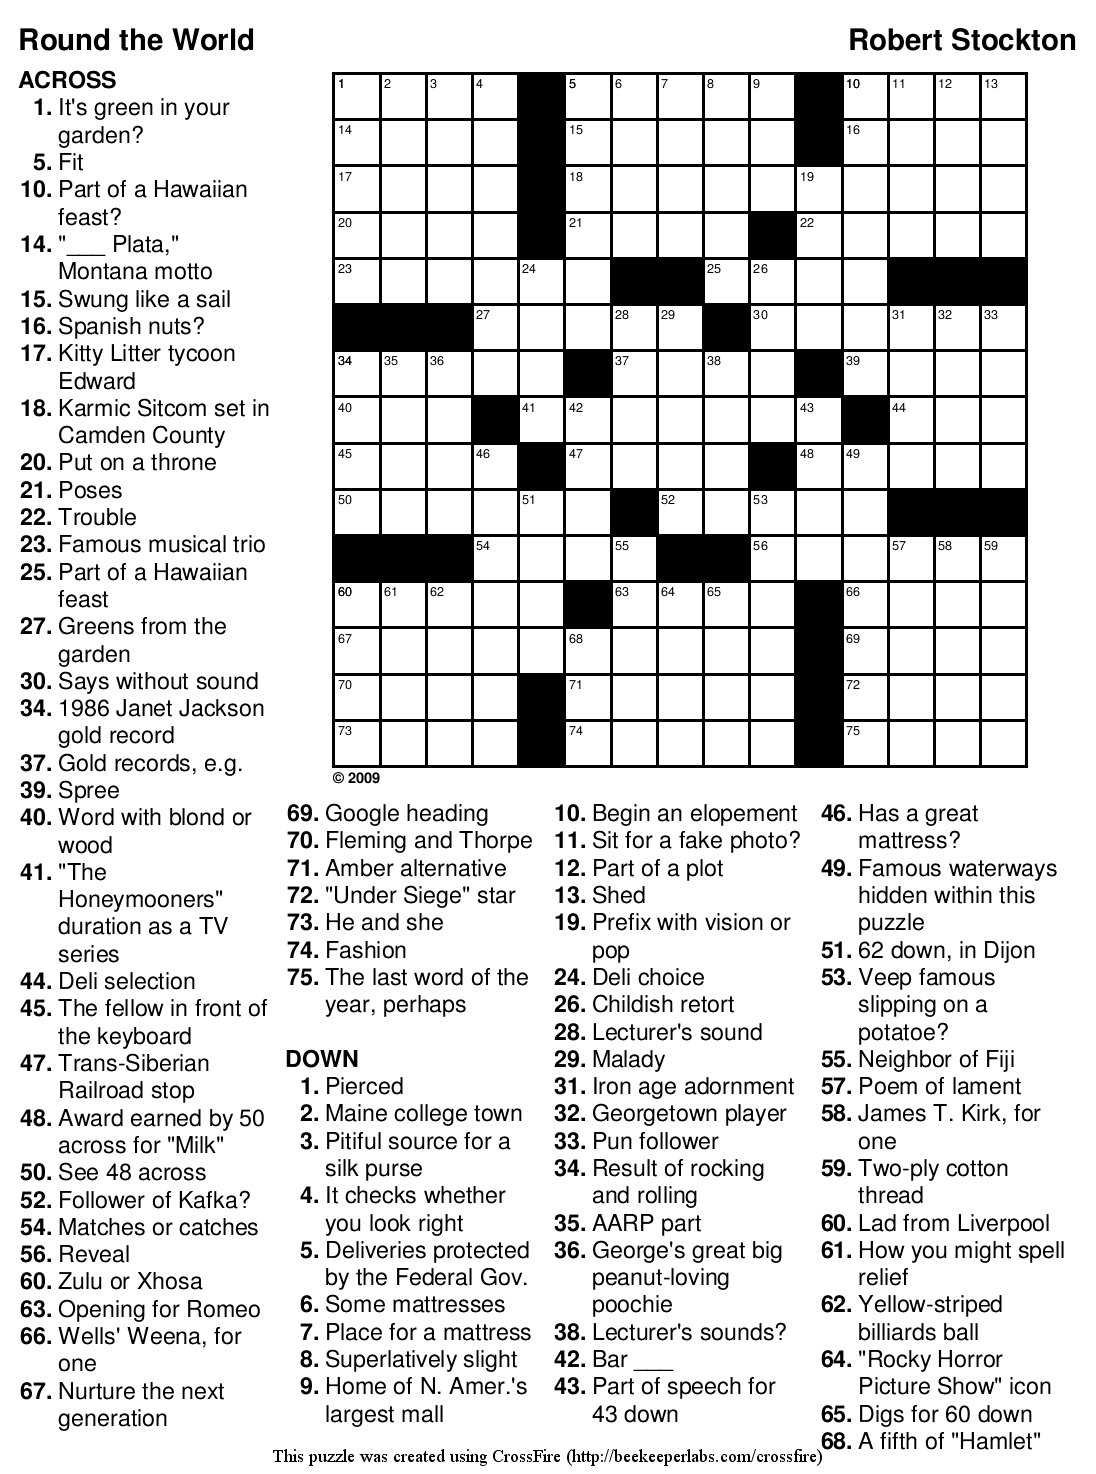 Essay Pages Crossword Clue Research Paper Example - June 2019 - 2089 - Printable Crosswords Daily Nov 2018